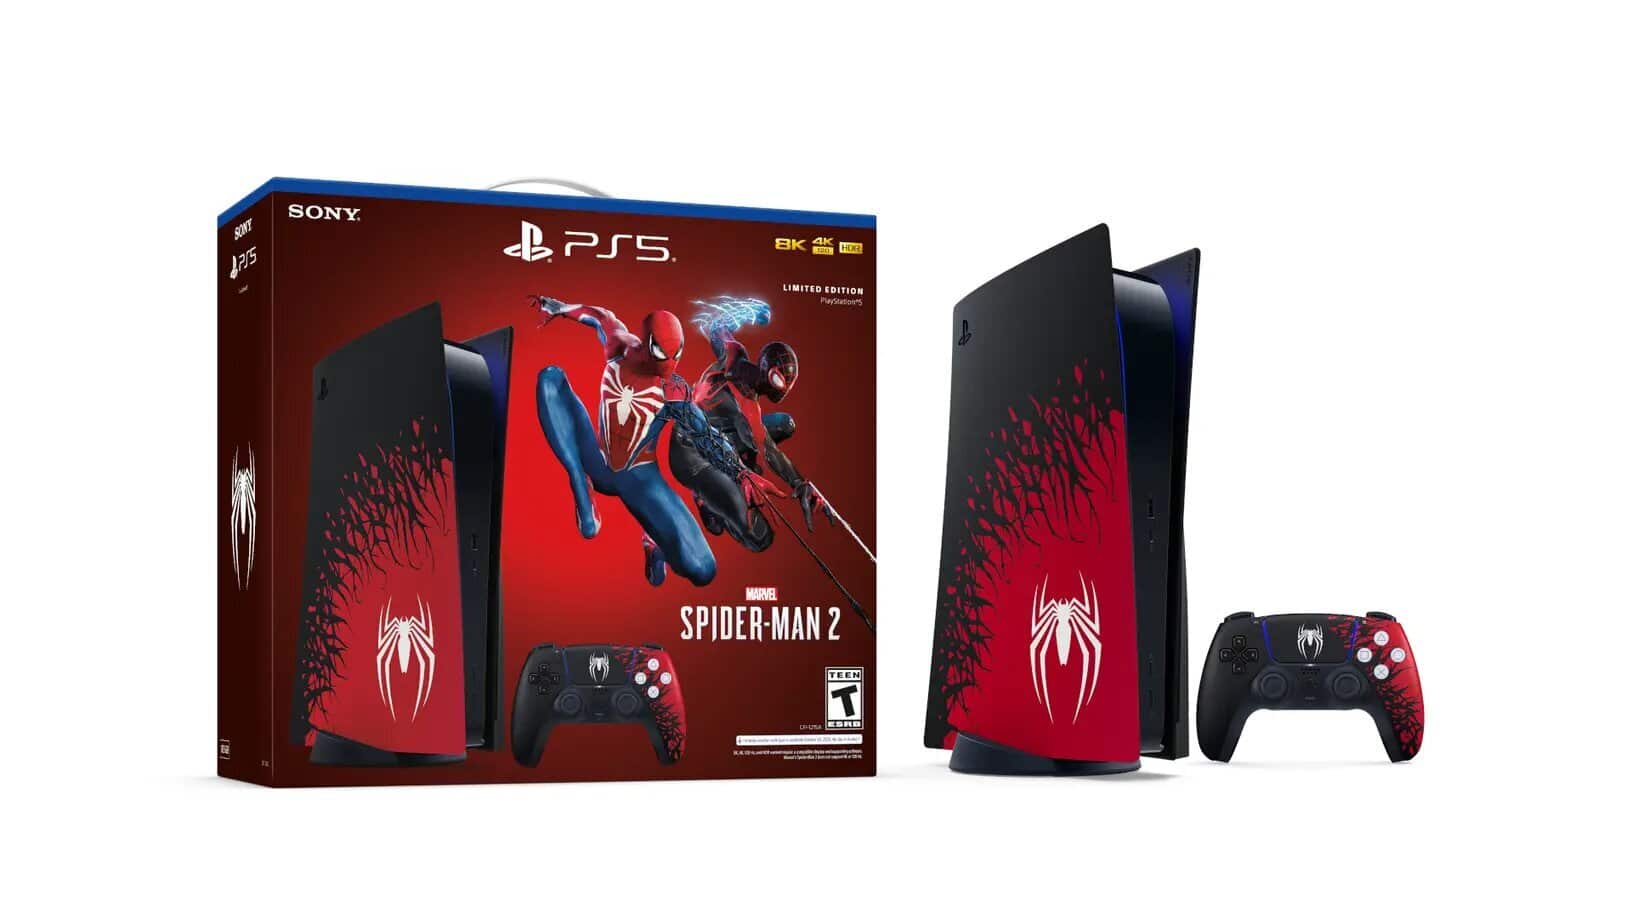 Limited Edition Marvel's Spider-Man 2 PS5 Costs R15,999 in South Africa - Pre-Order Now